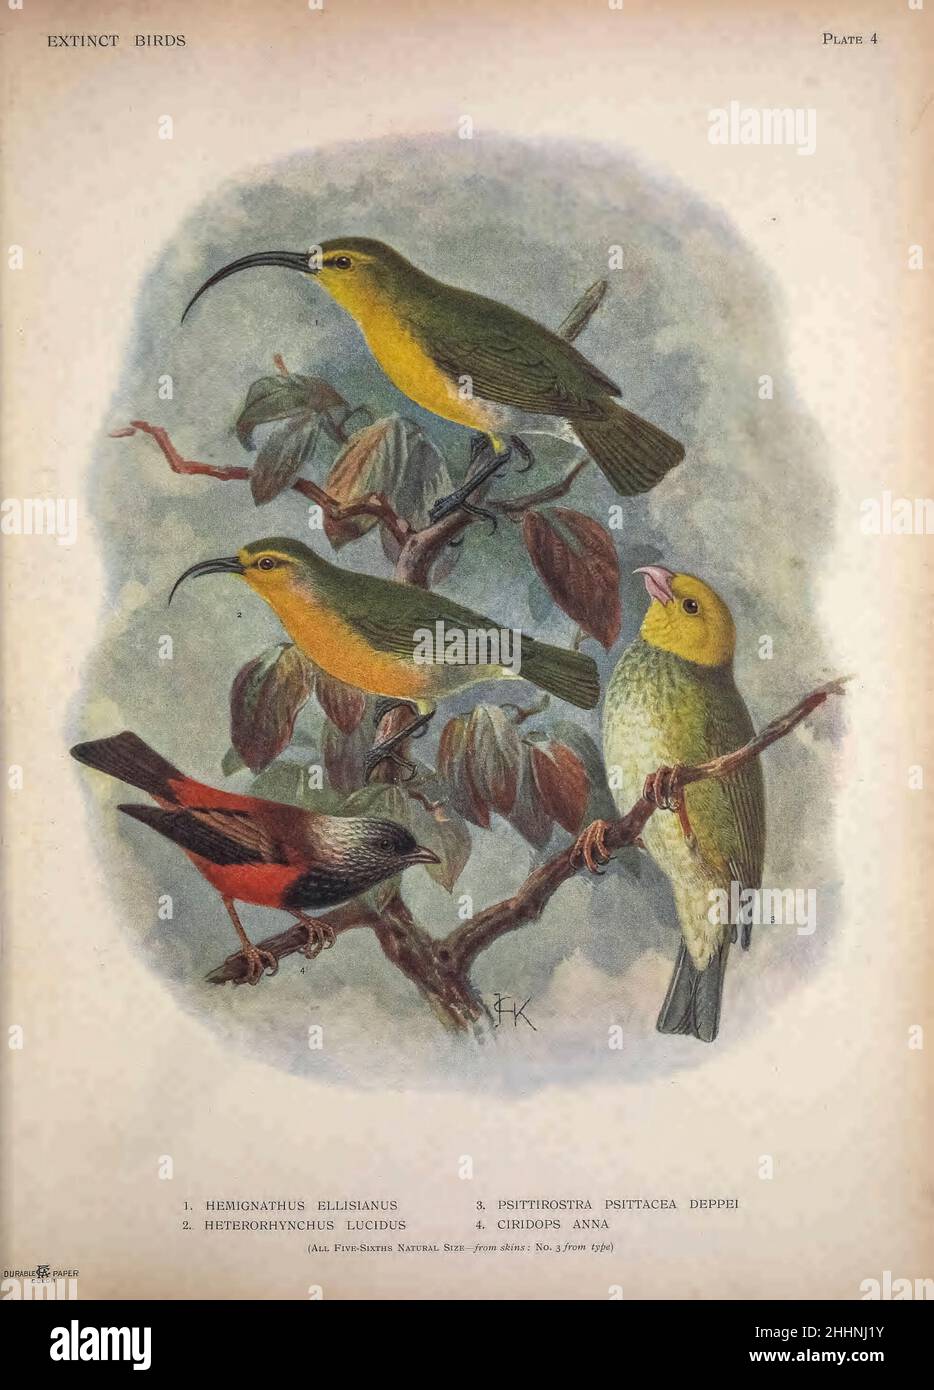 1.  Oʻahu ʻakialoa (Akialoa ellisana syn Hemignathus ellisianus). 2. nukupuʻu (Heterorhynchus lucidus). 3. Hawaiian honeycreeper (Psittirostra psittacea deppei). 4. Stout-legged finch (Ciridops anna)  from ' Extinct birds ' : an attempt to unite in one volume a short account of those birds which have become extinct in historical times : that is, within the last six or seven hundred years : to which are added a few which still exist, but are on the verge of extinction. by Baron, Lionel Walter Rothschild, 1868-1937 Published 1907 as a limited edition book in London by Hutchinson & Co. Stock Photo